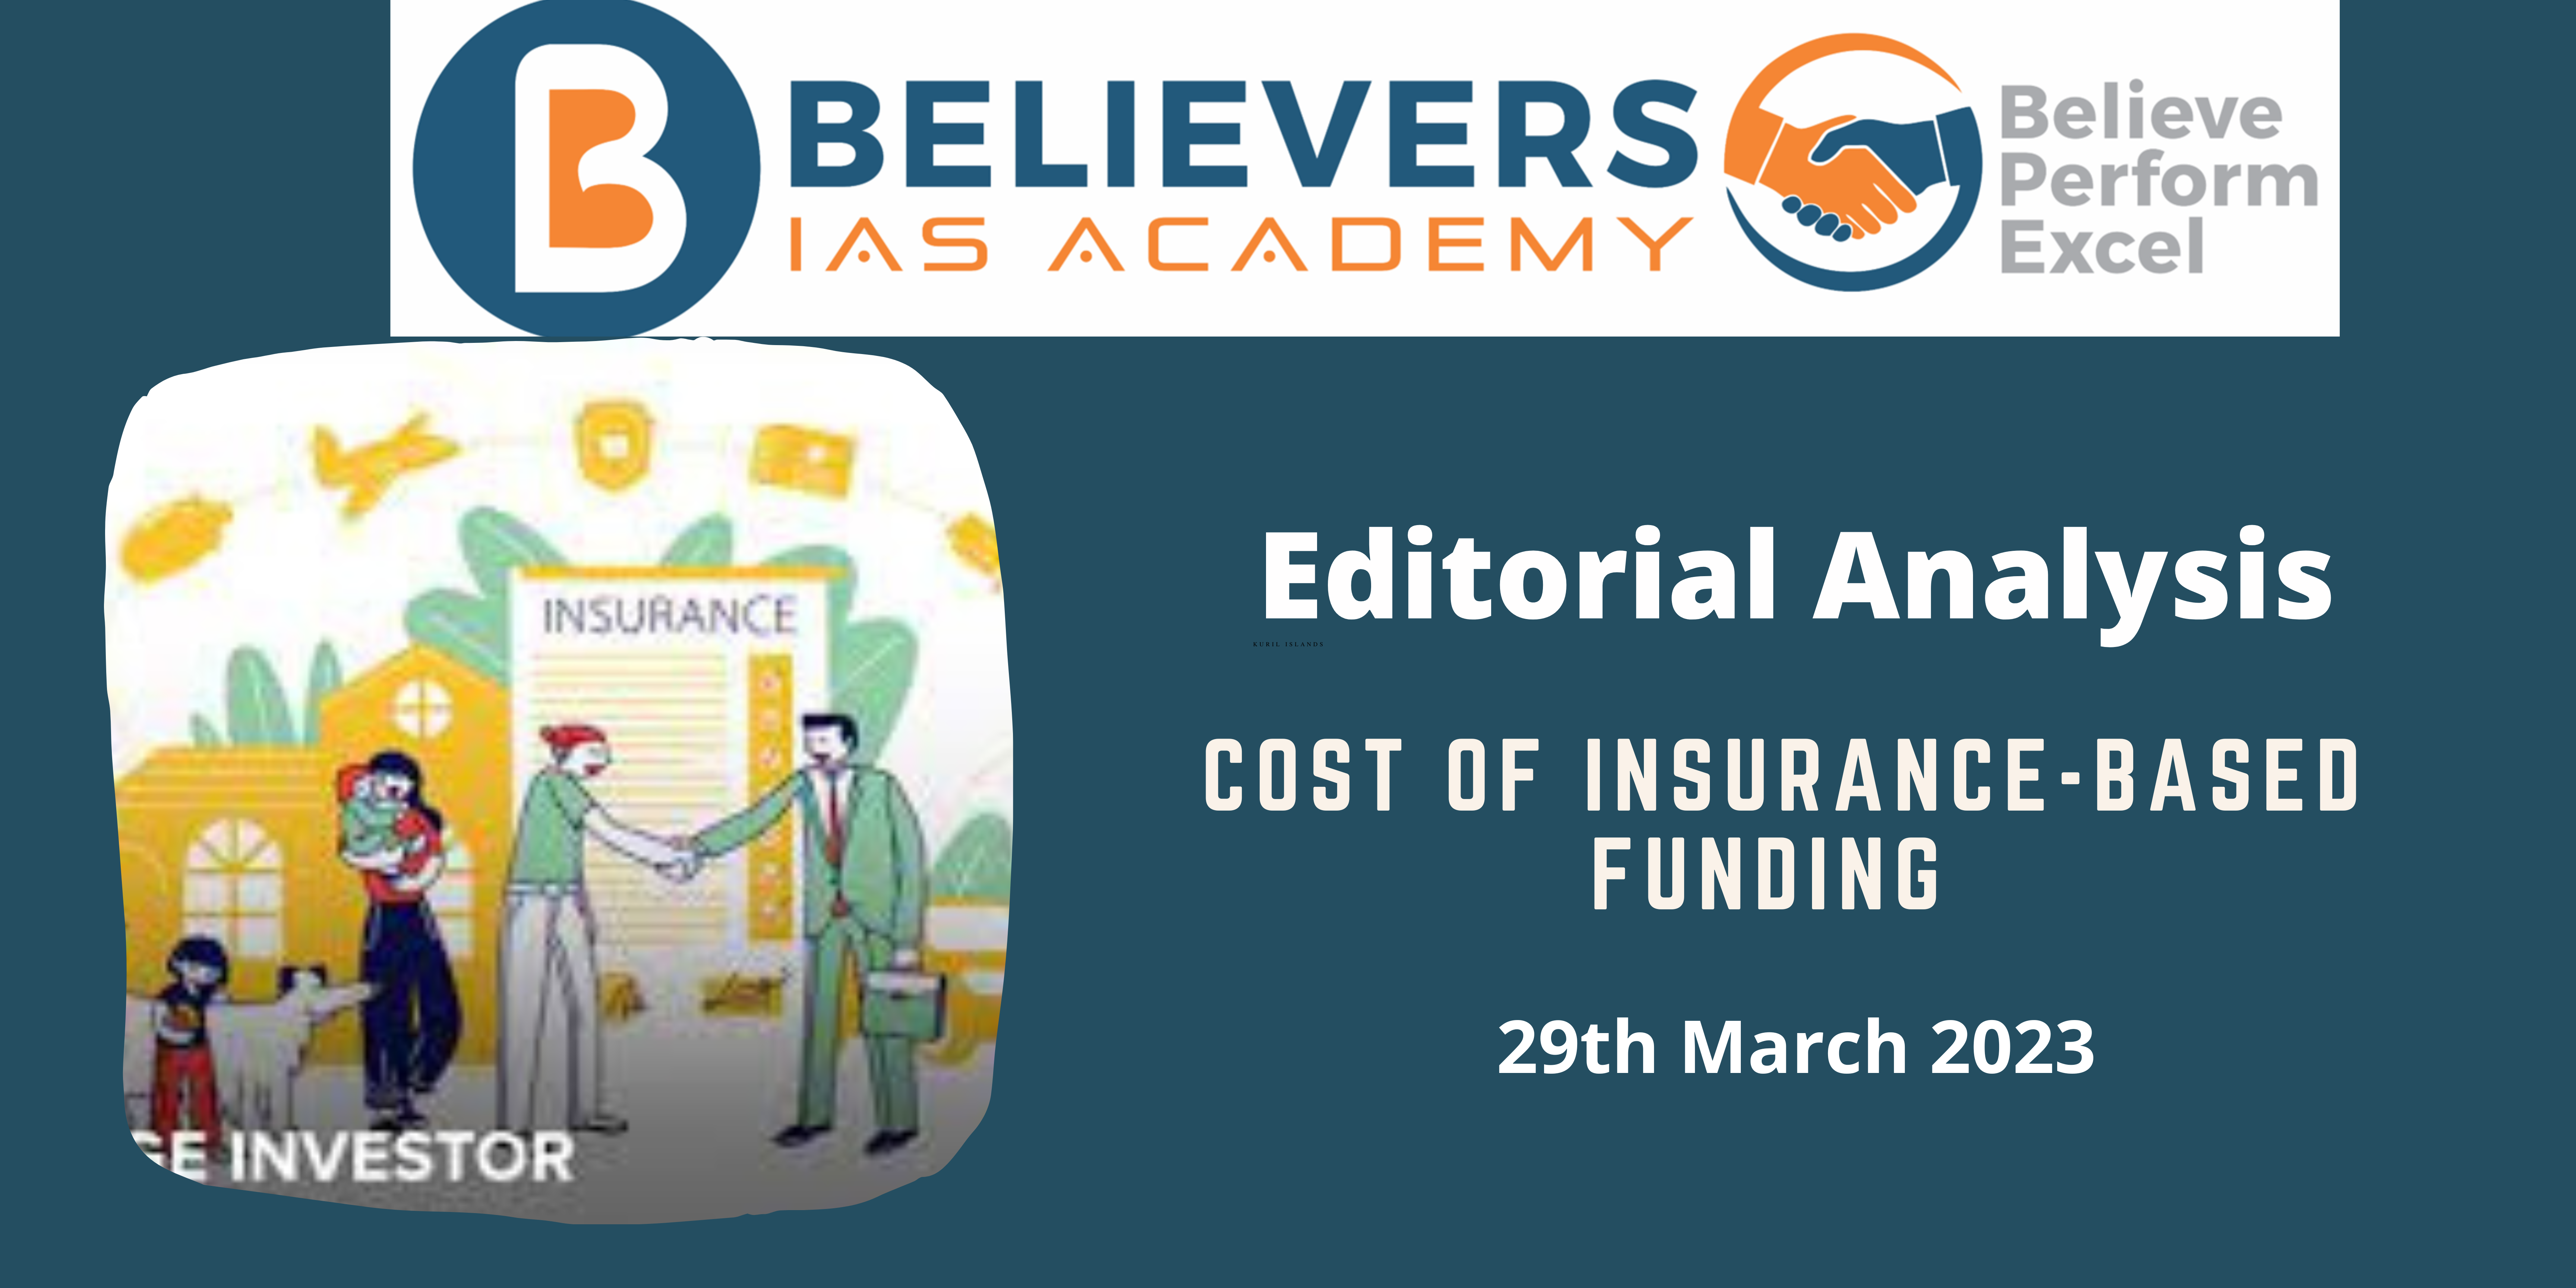 Cost of insurance-based funding